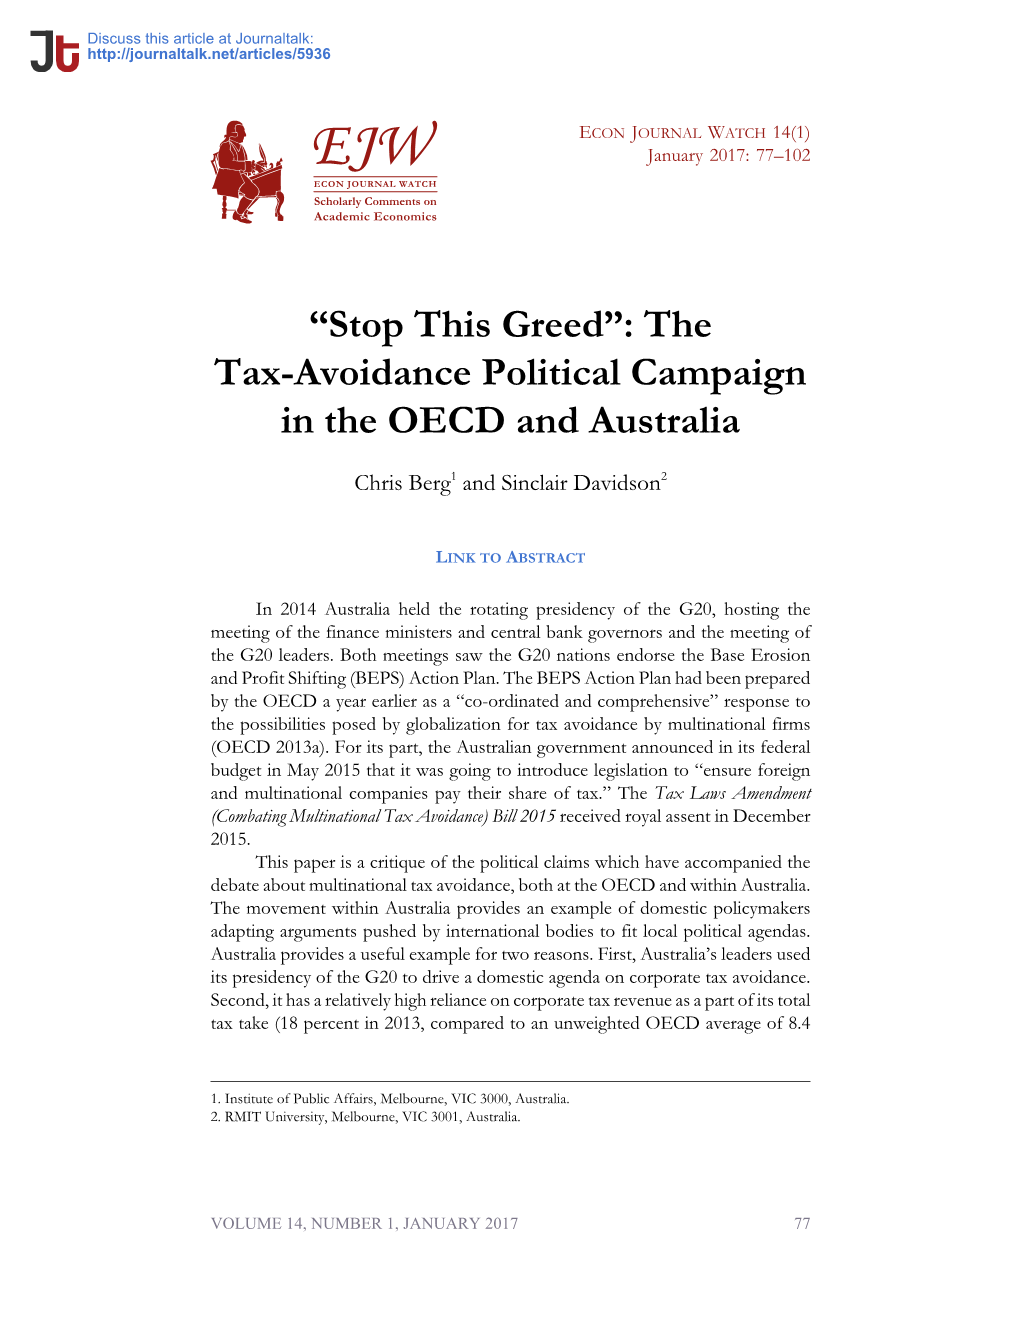 The Tax-Avoidance Political Campaign in the OECD and Australia